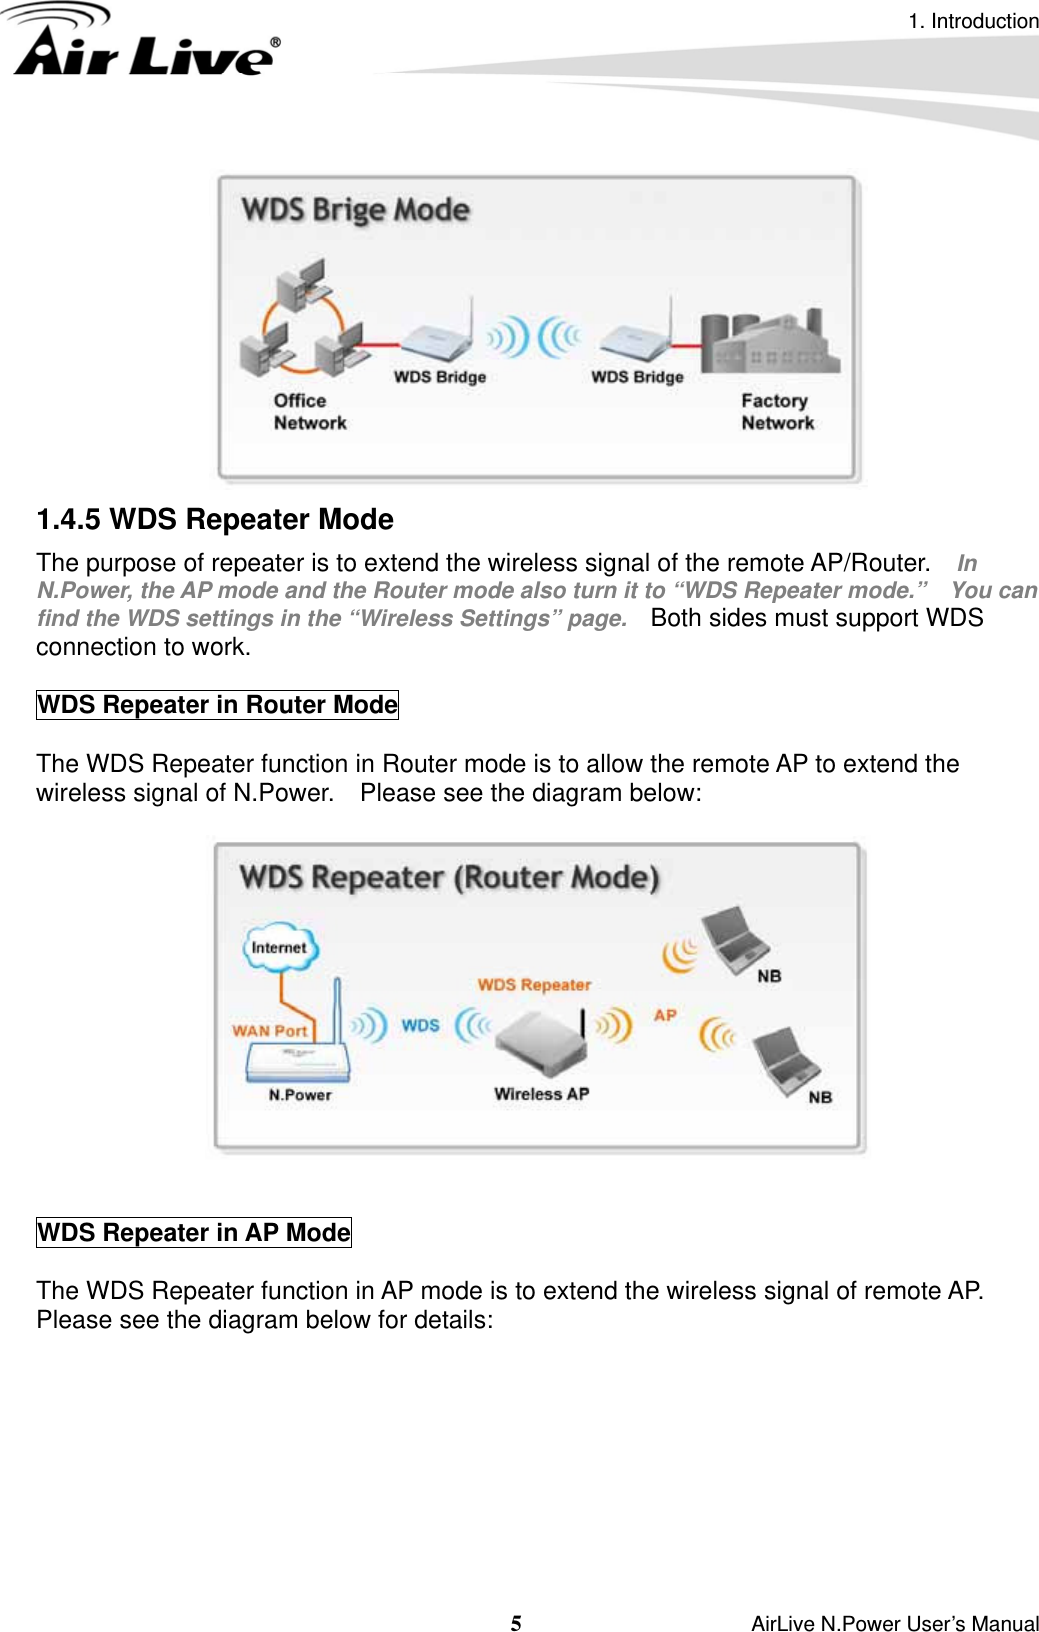 1. Introduction 5                    AirLive N.Power User’s Manual  1.4.5 WDS Repeater Mode The purpose of repeater is to extend the wireless signal of the remote AP/Router.   In N.Power, the AP mode and the Router mode also turn it to “WDS Repeater mode.”    You can find the WDS settings in the “Wireless Settings” page.   Both sides must support WDS connection to work.  WDS Repeater in Router Mode  The WDS Repeater function in Router mode is to allow the remote AP to extend the wireless signal of N.Power.    Please see the diagram below:     WDS Repeater in AP Mode  The WDS Repeater function in AP mode is to extend the wireless signal of remote AP.   Please see the diagram below for details:   